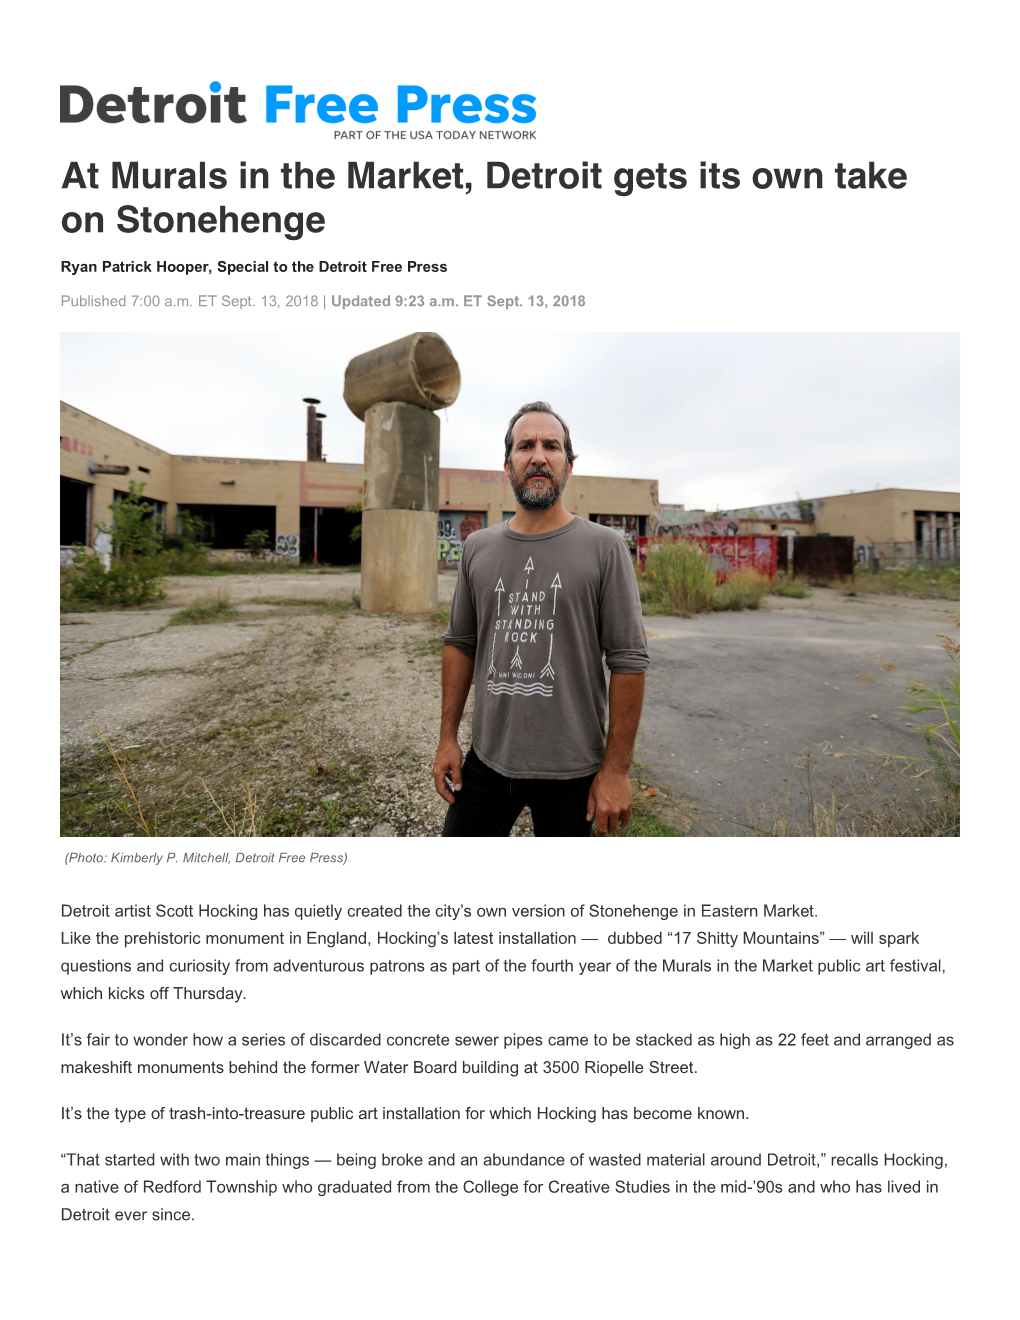 09/13/18 at Murals in the Market, Detroit Gets Its Own Take On